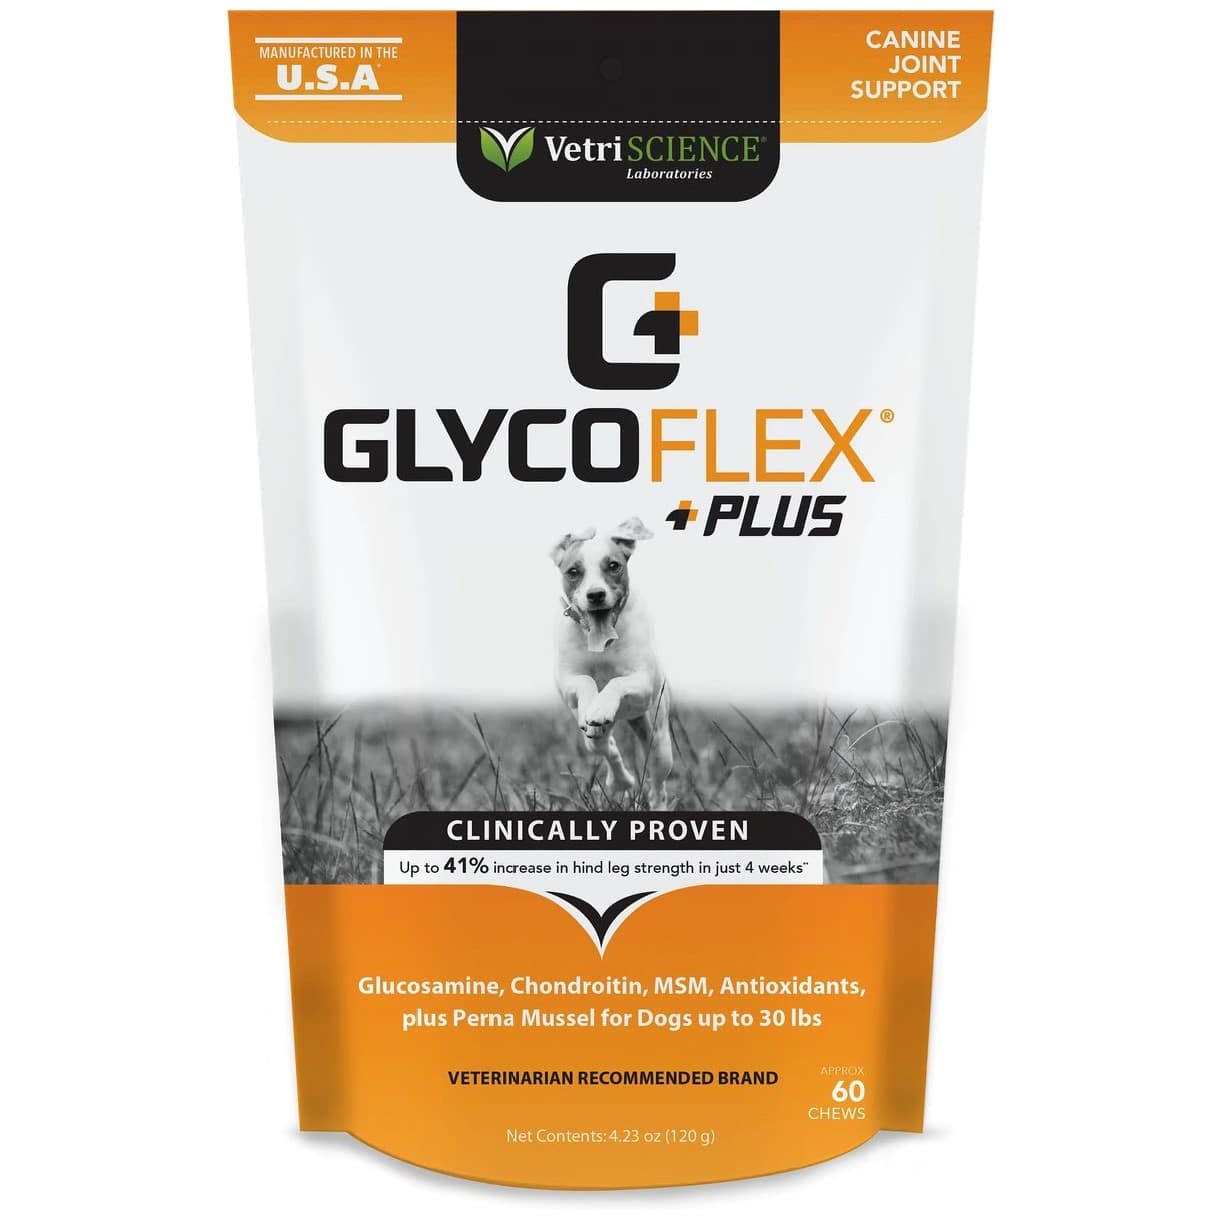 VetriScience GlycoFlex Plus Duck Flavored Soft Chews Joint Supplement for Small Dogs